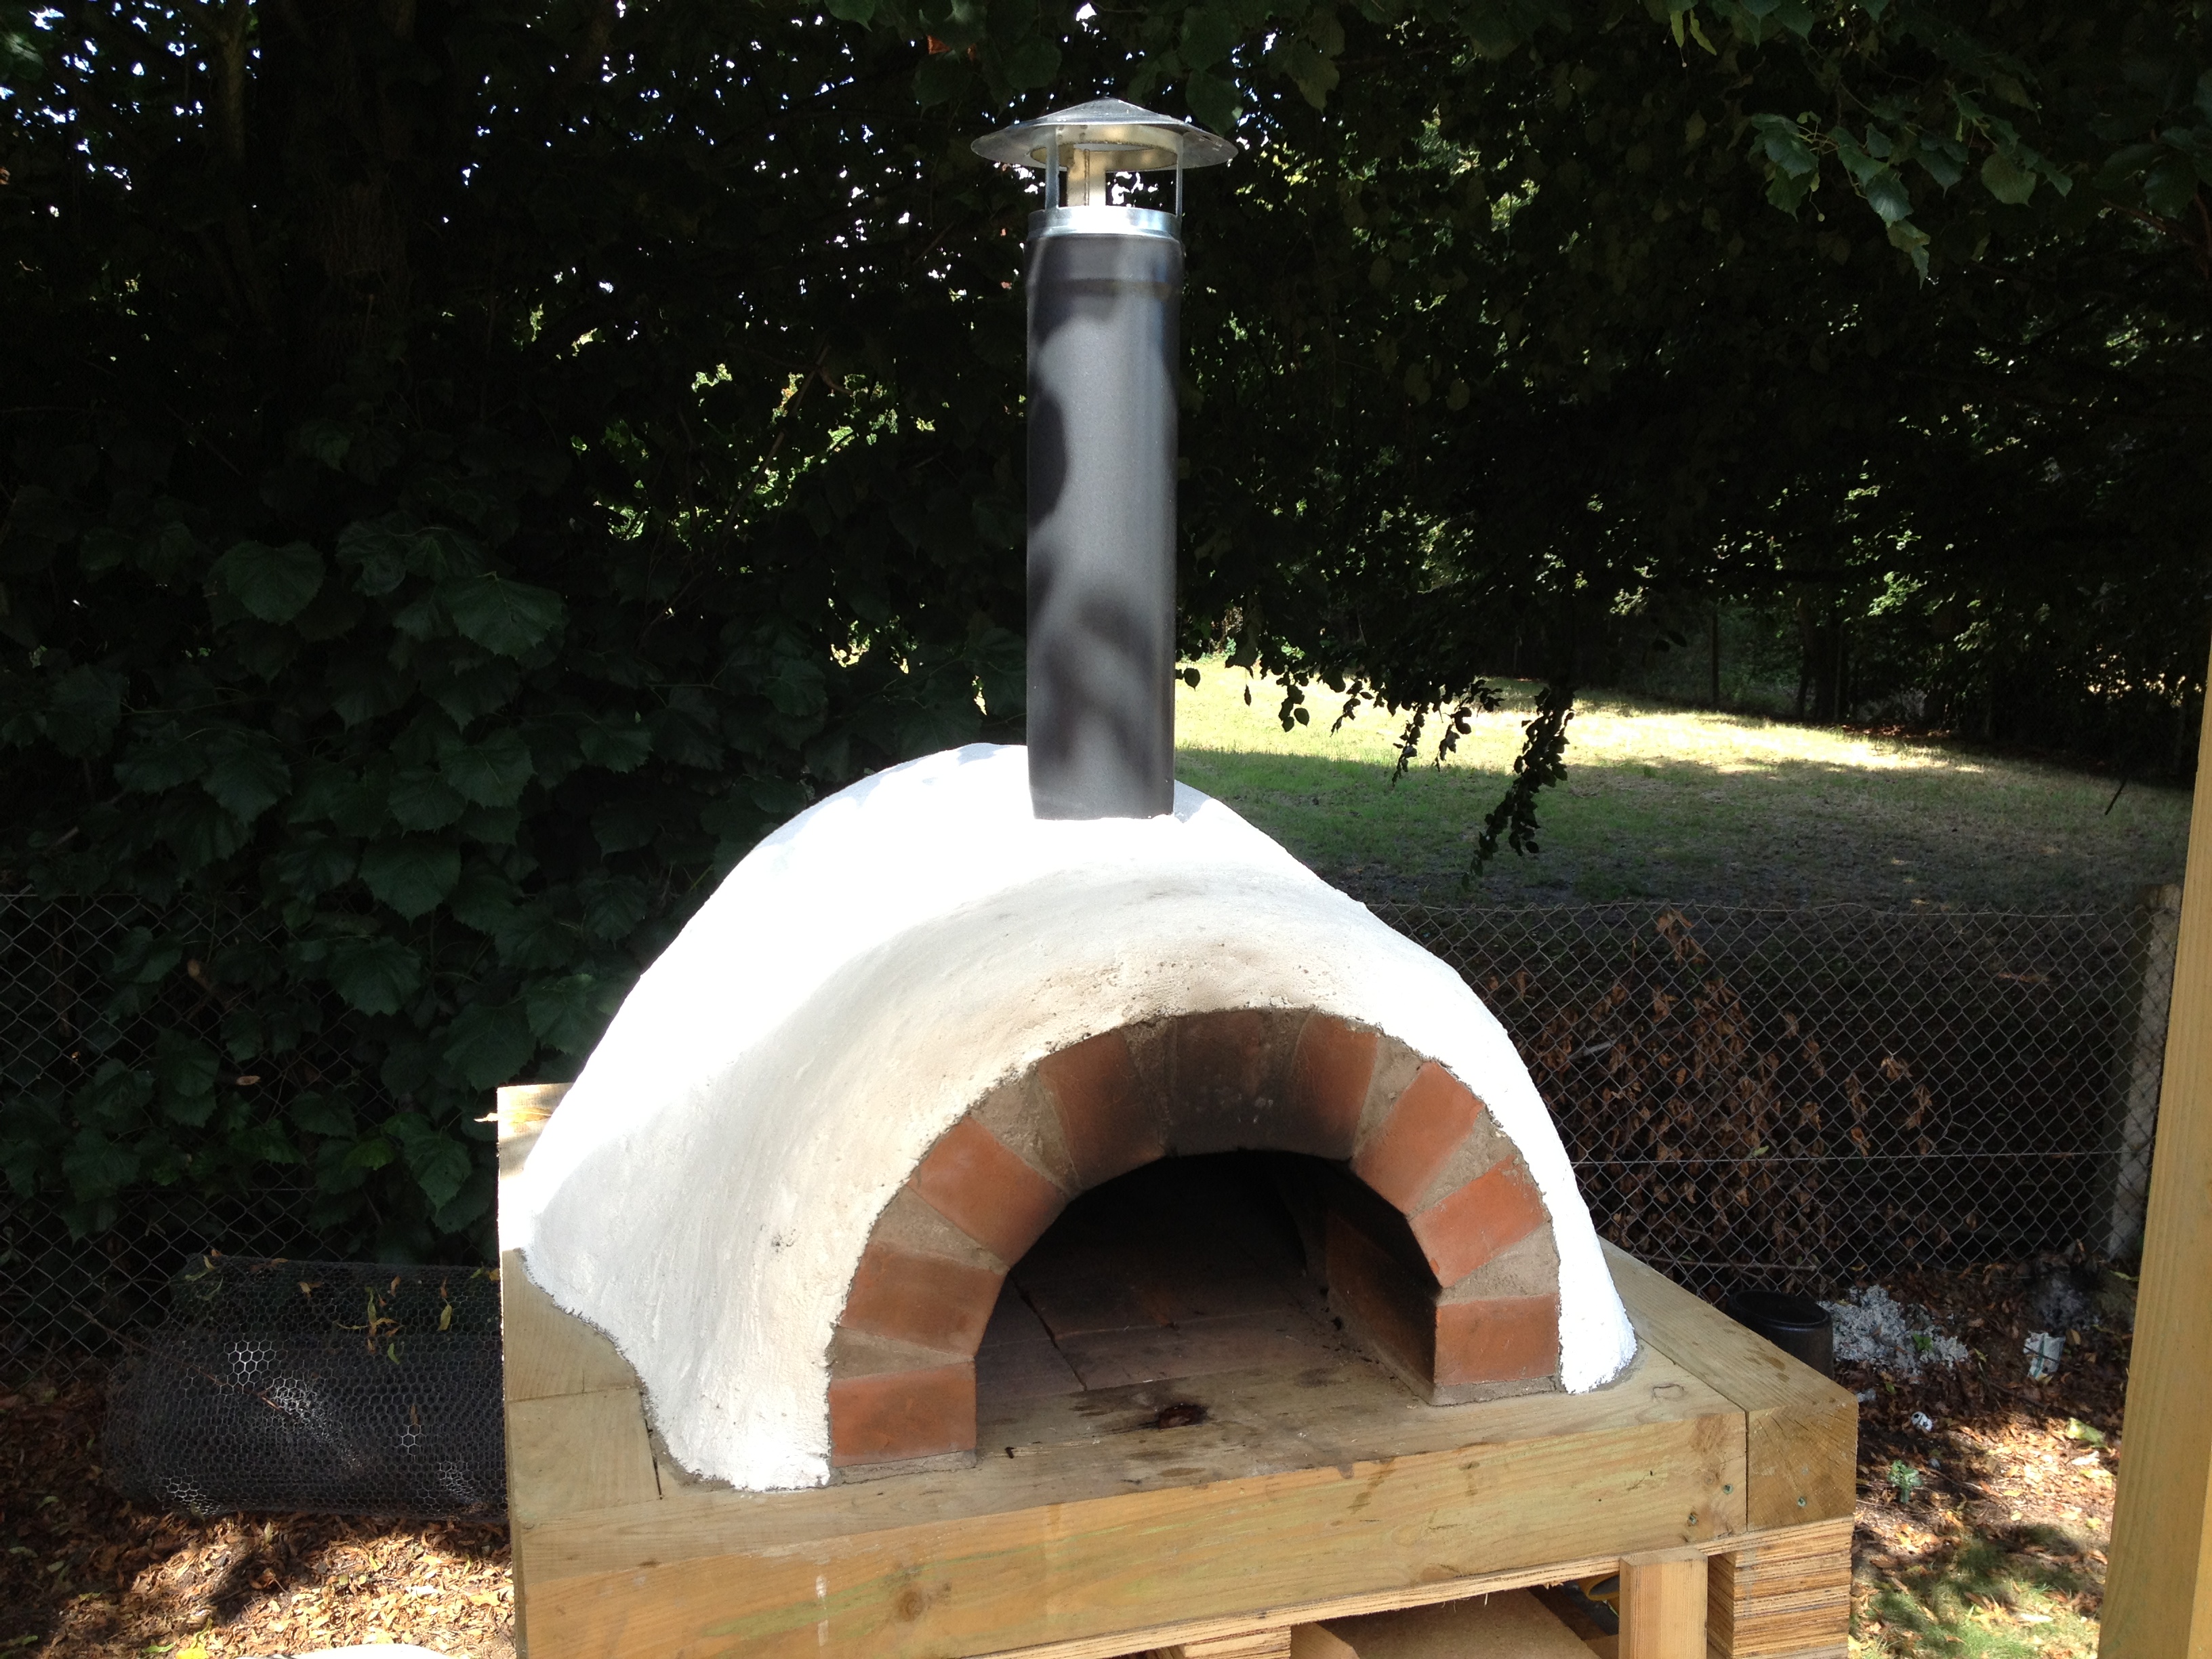 The Homemade Pallet Based Wood Fired Pizza Oven | Emlyn's ...